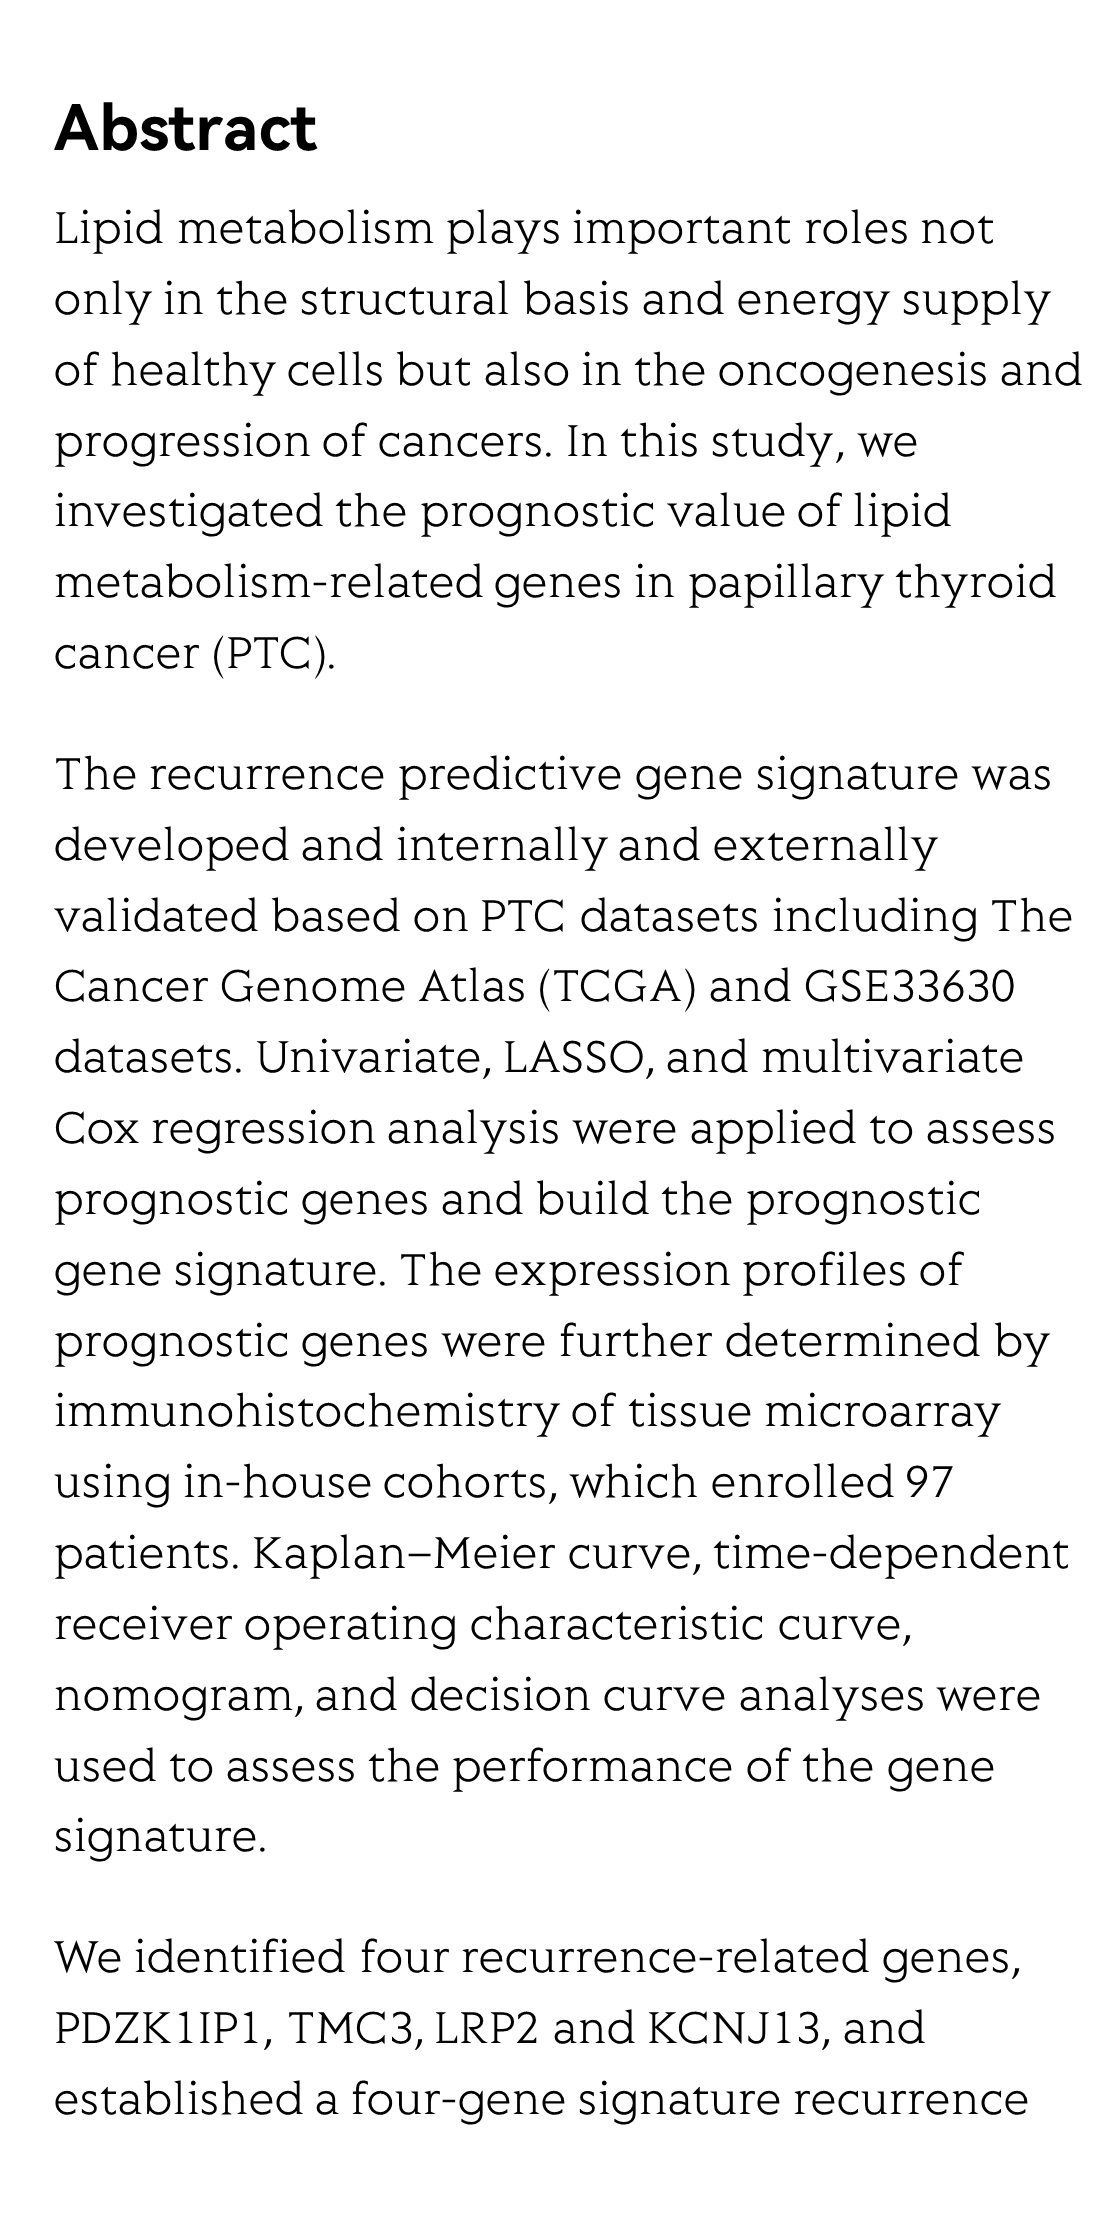 Identification of lipid metabolism-related genes as prognostic indicators in papillary thyroid cancer_2